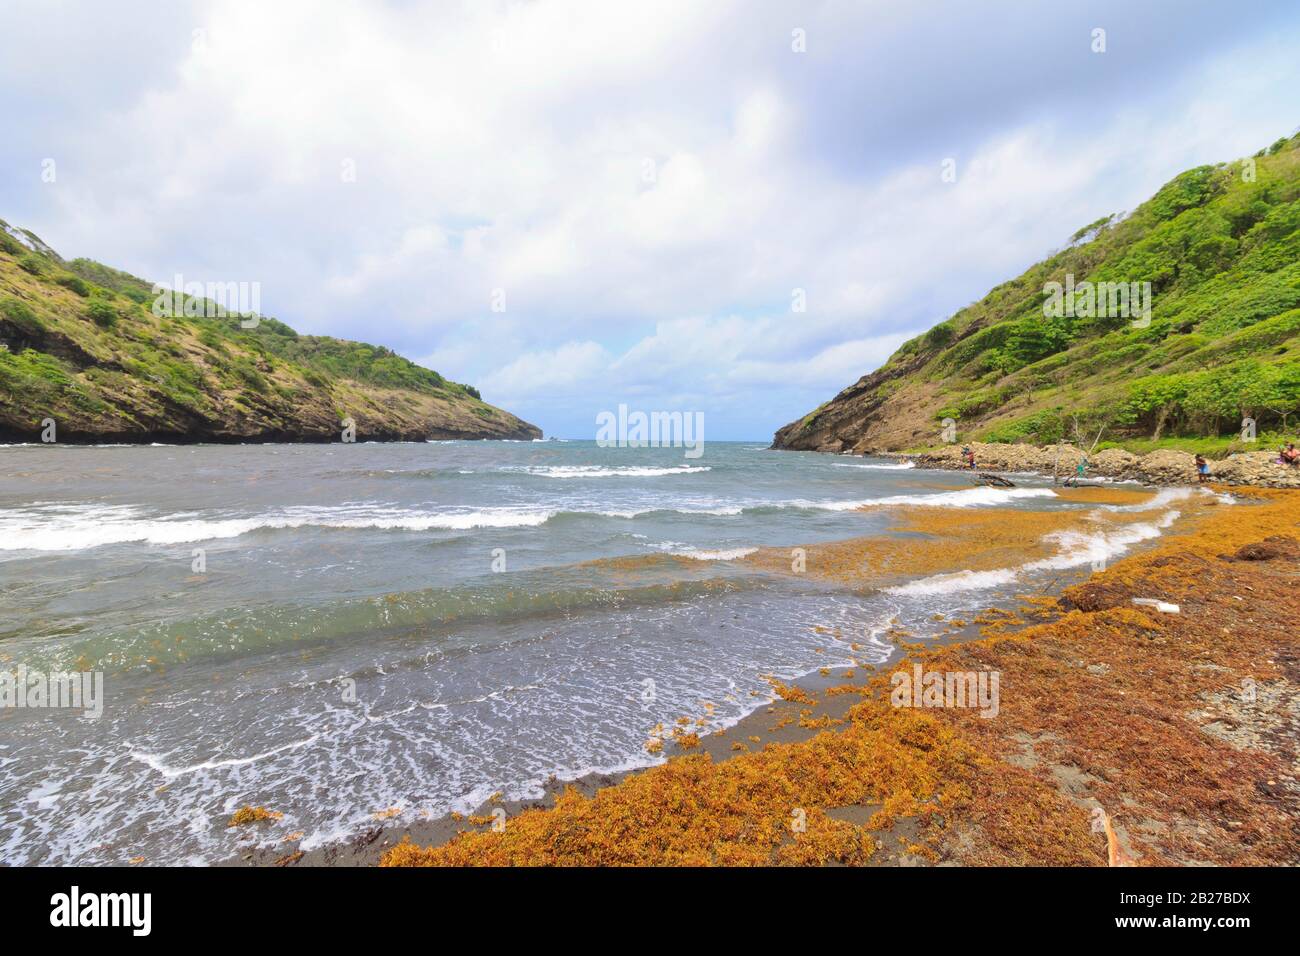 small sheltered bay in a rural village with overcast sky when the sea is not calm and black sand beach covered in seaweed with people in background Stock Photo